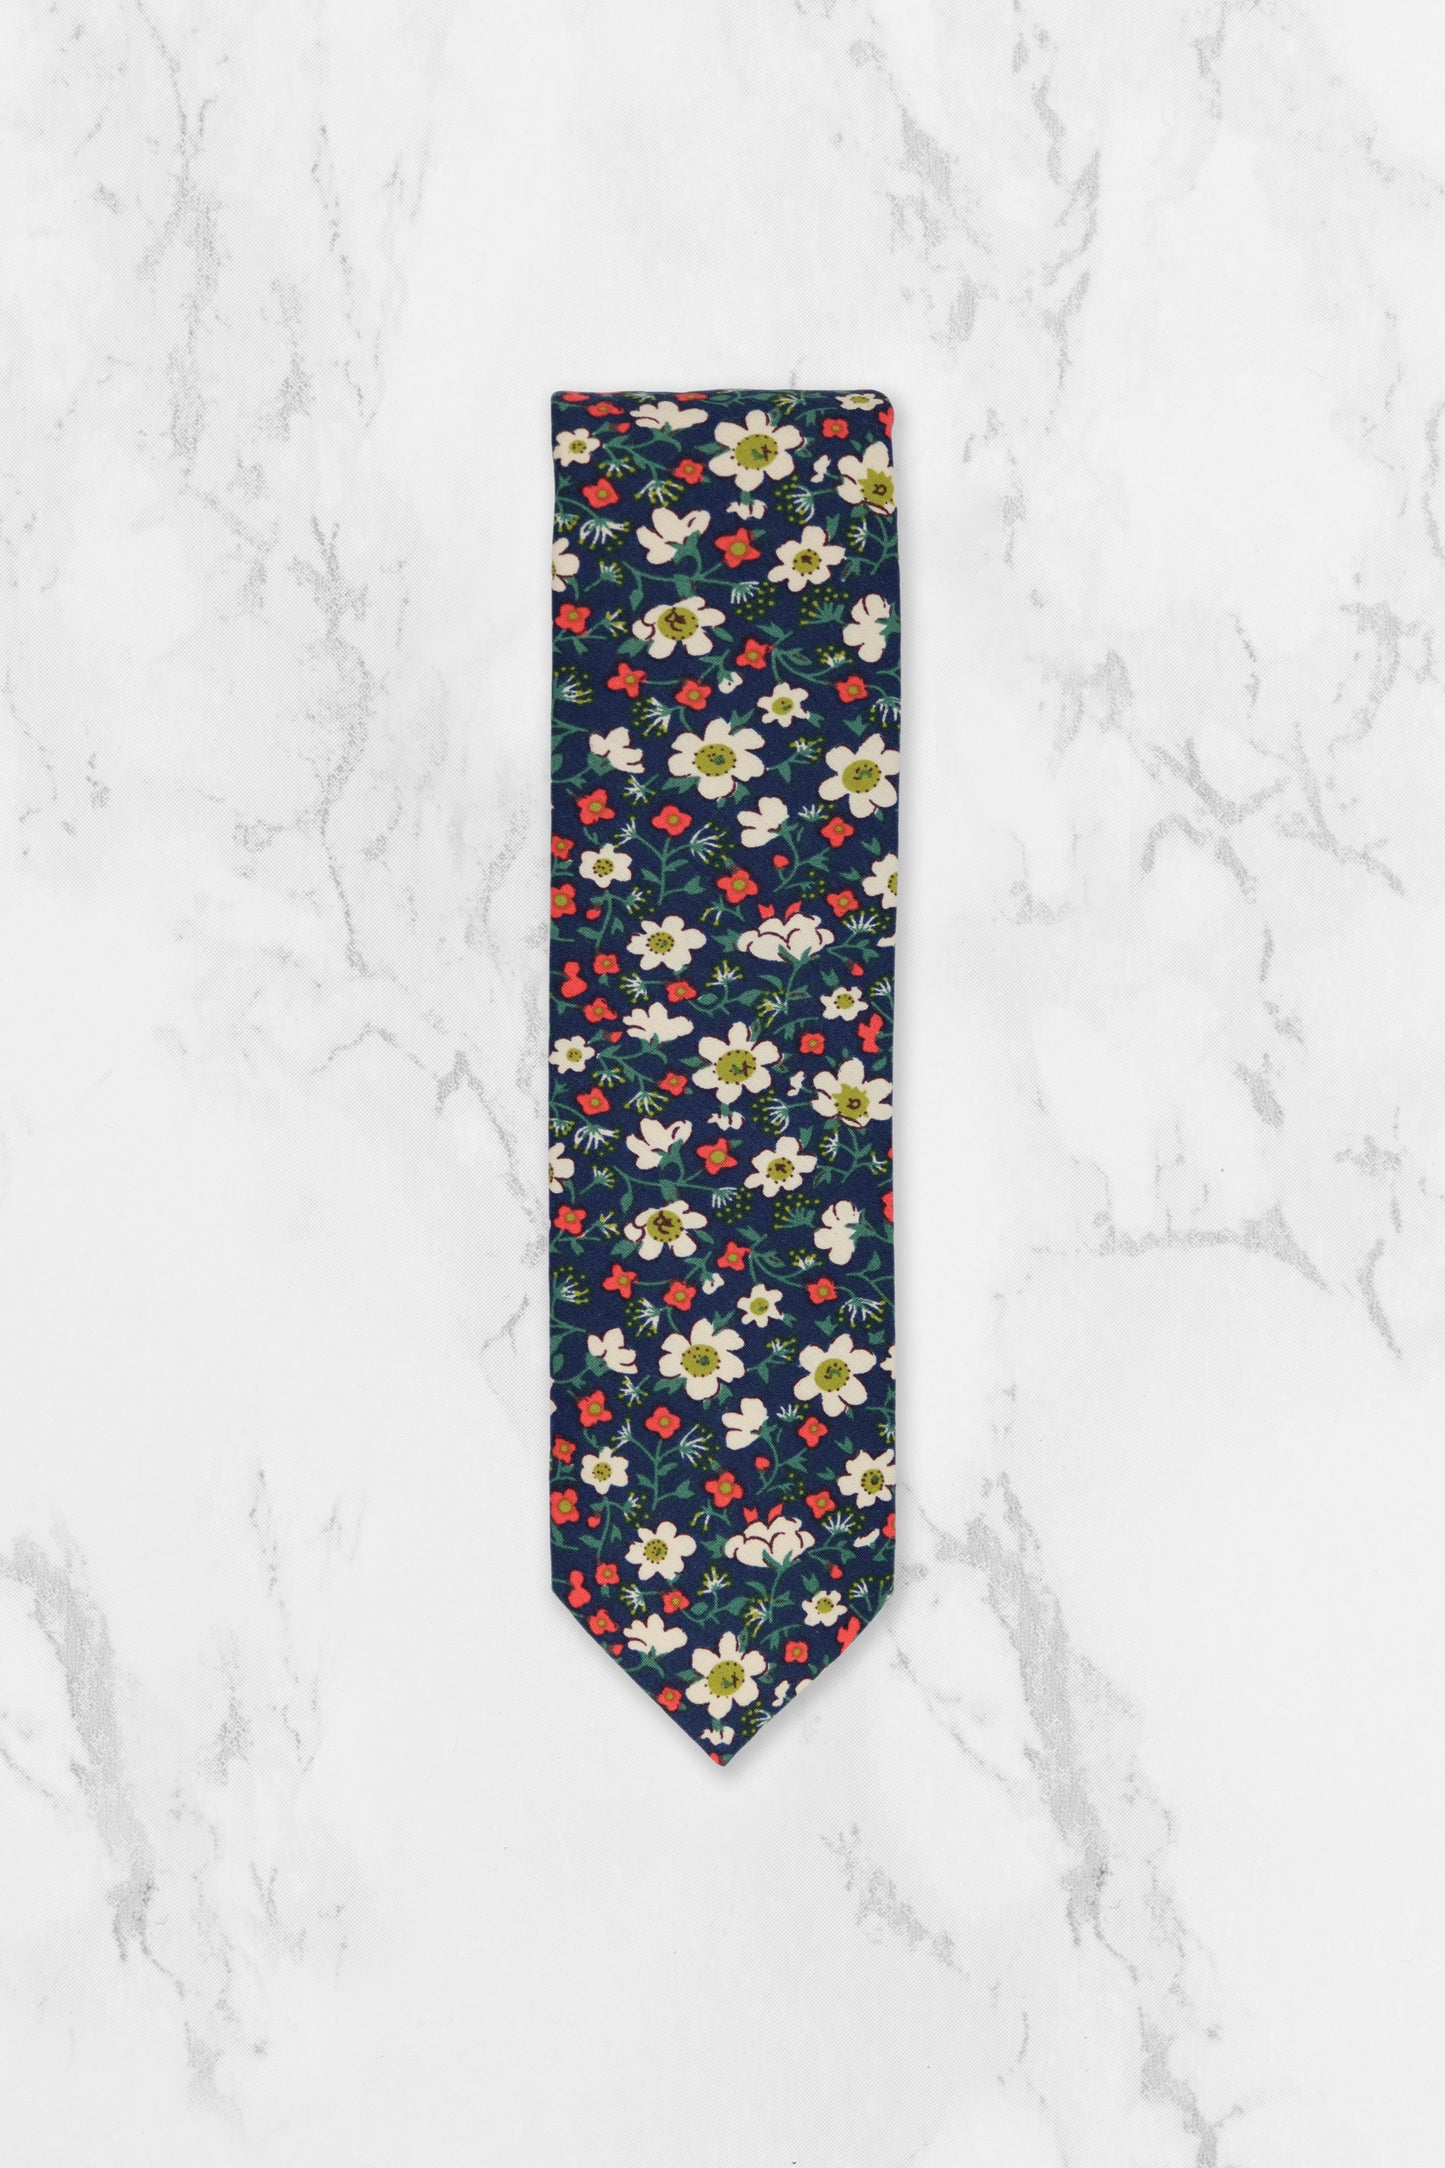 100% Cotton Floral Print Bow Tie - Navy Blue, White & Red